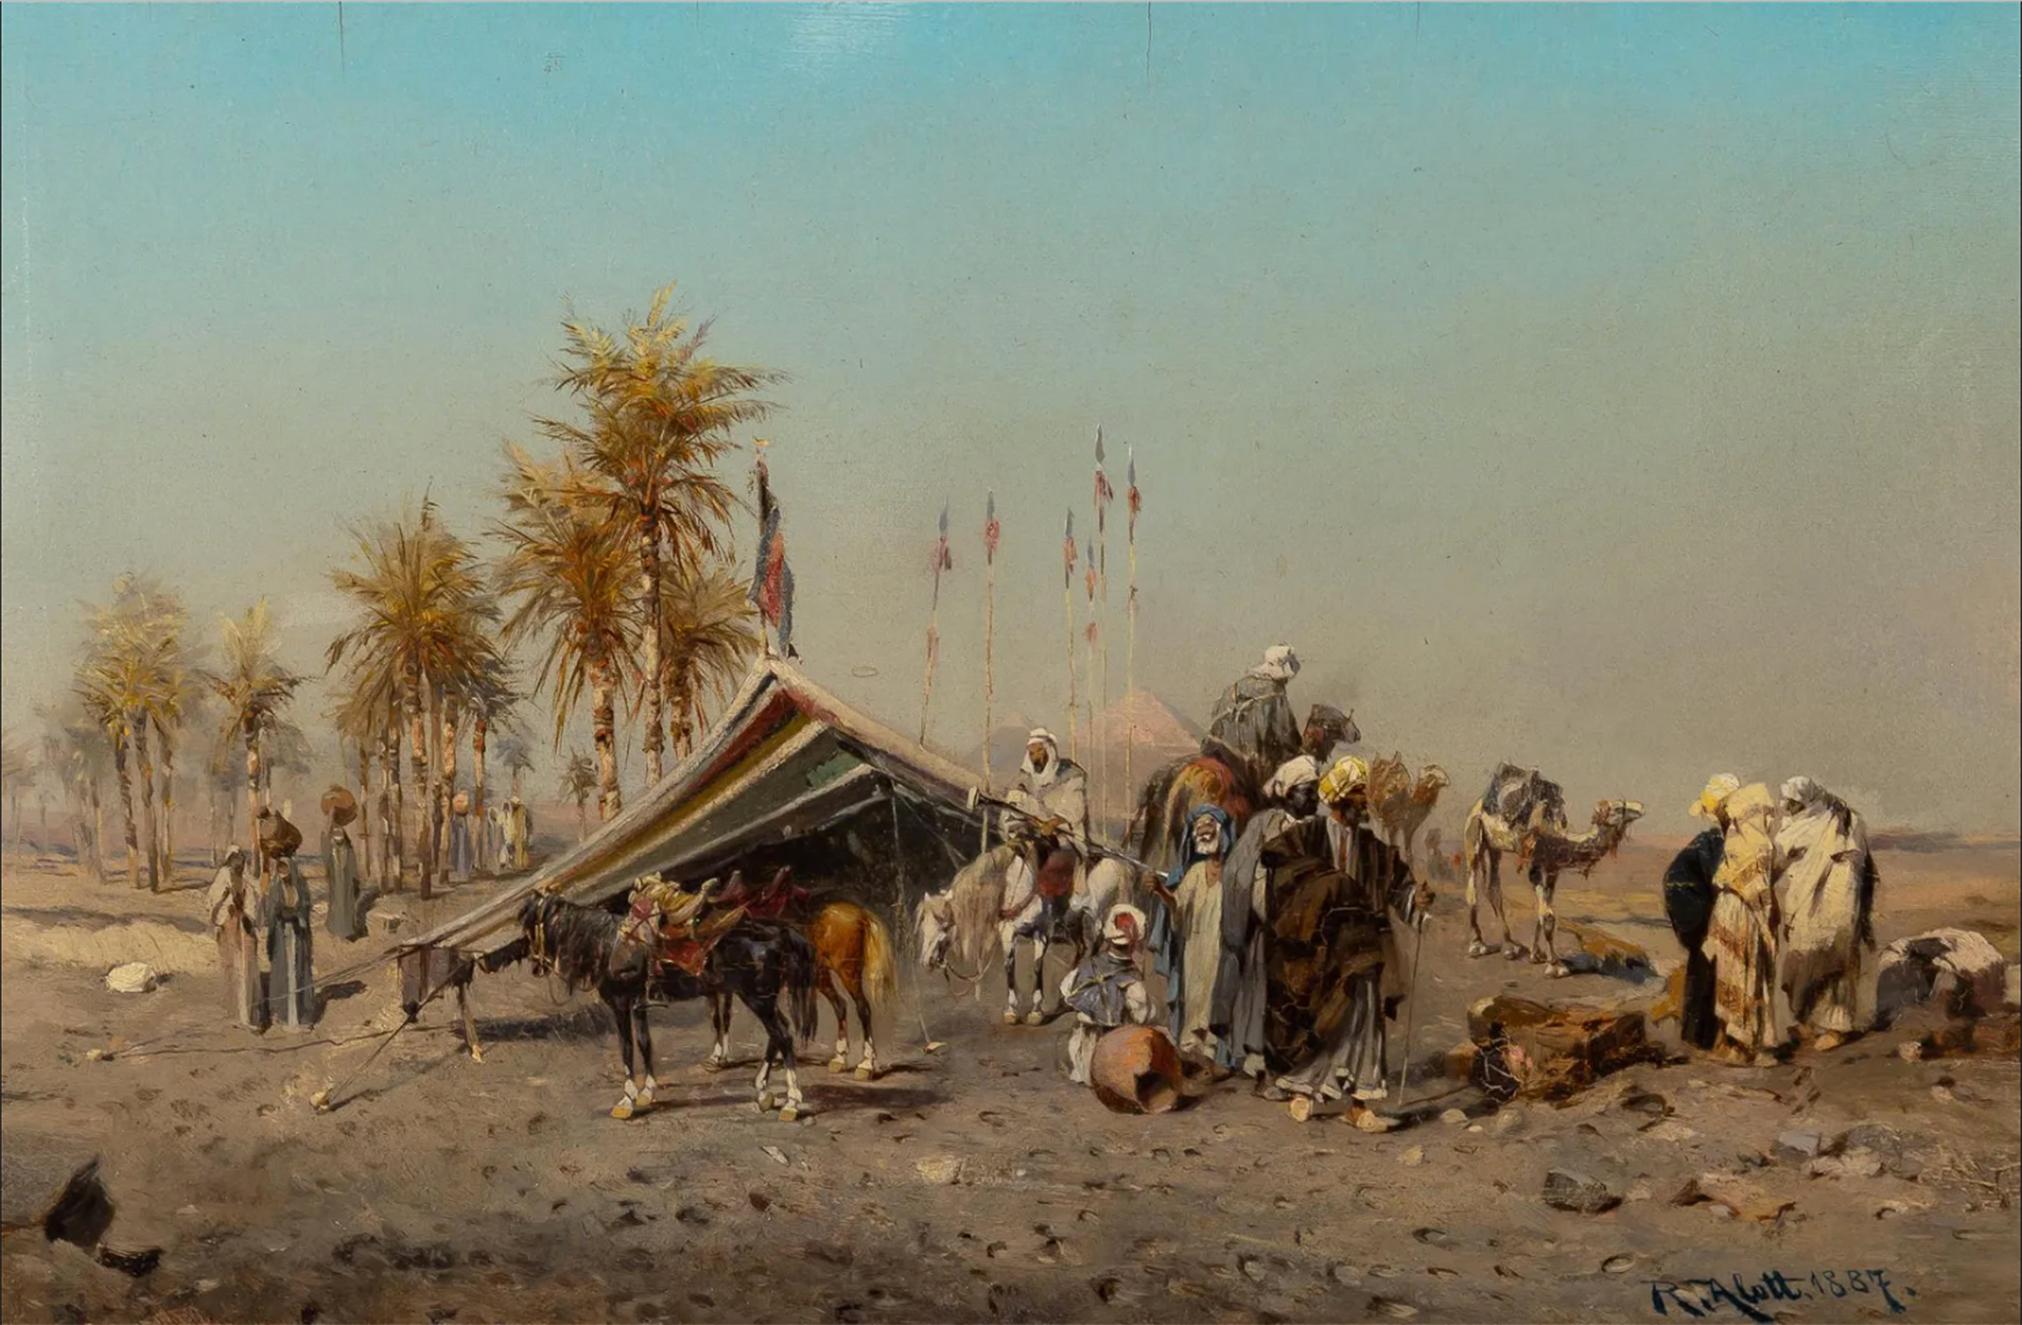 An Oasis in the Desert painting by Robert Alott, 1850-1910 For Sale 1